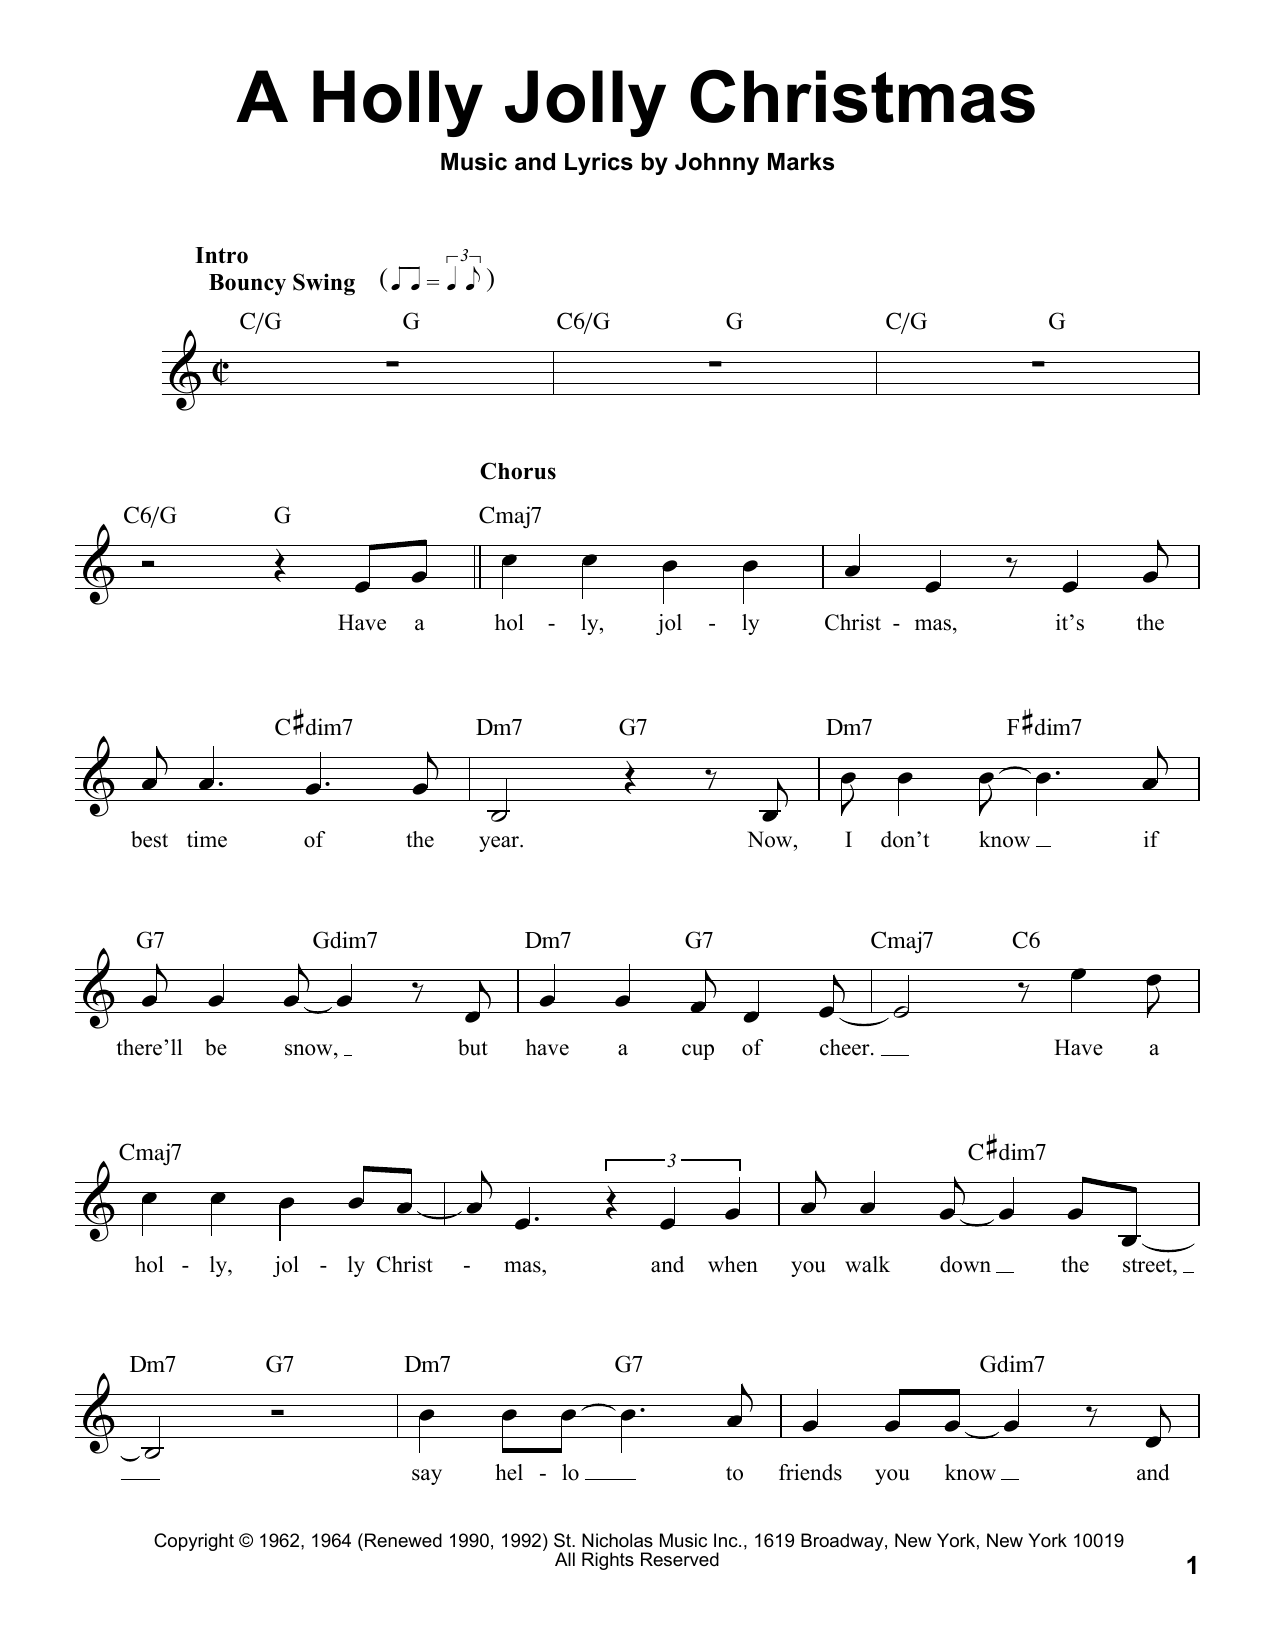 Michael Bublé "A Holly Jolly Christmas" Sheet Music Notes, Chords